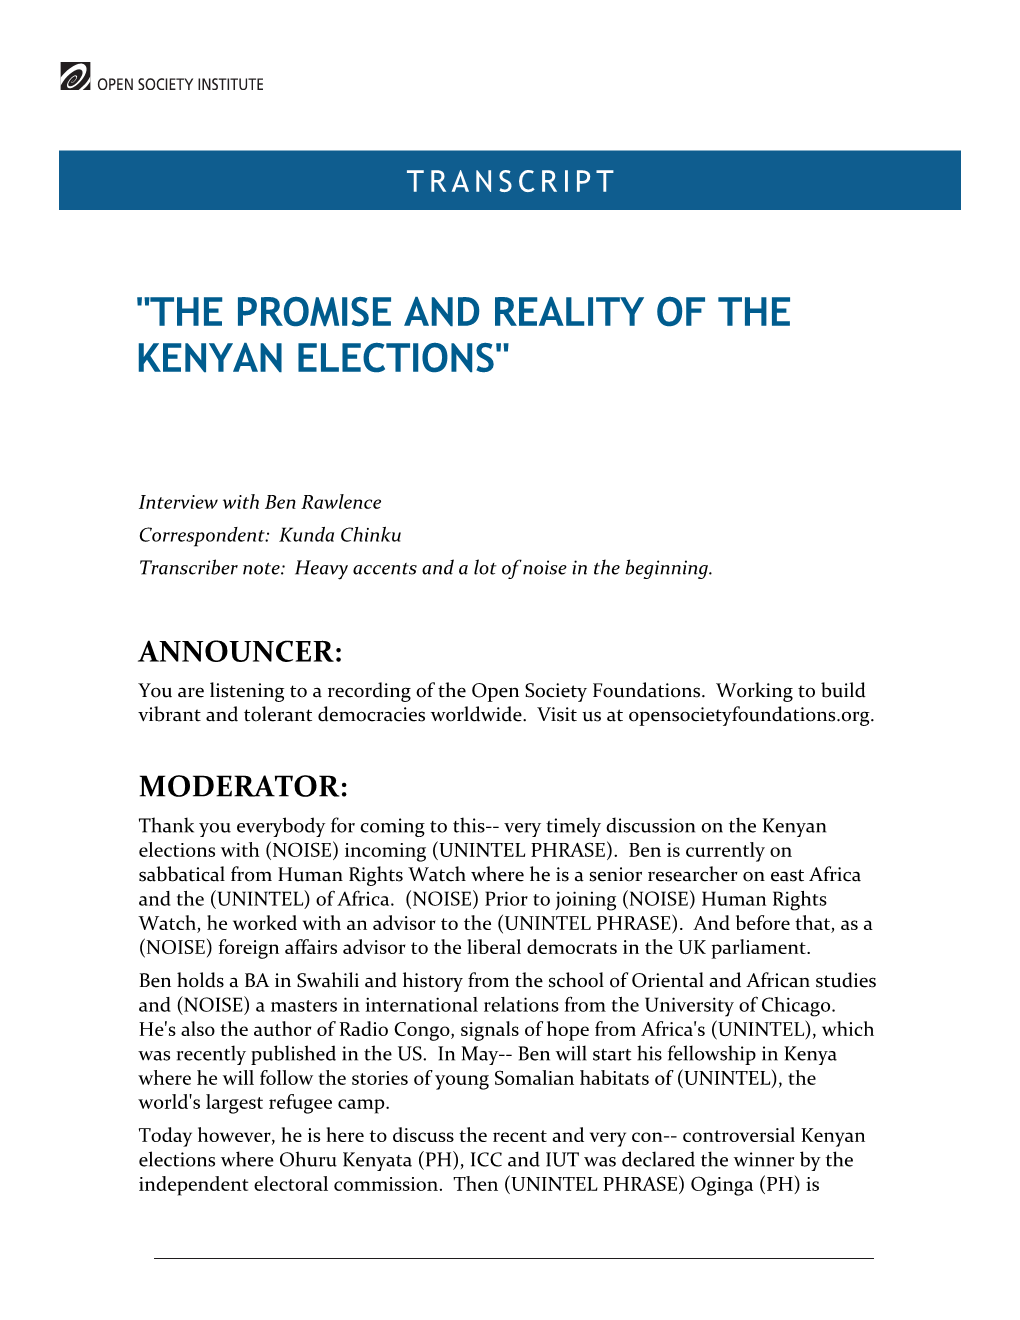 "The Promise and Reality of the Kenyan Elections"